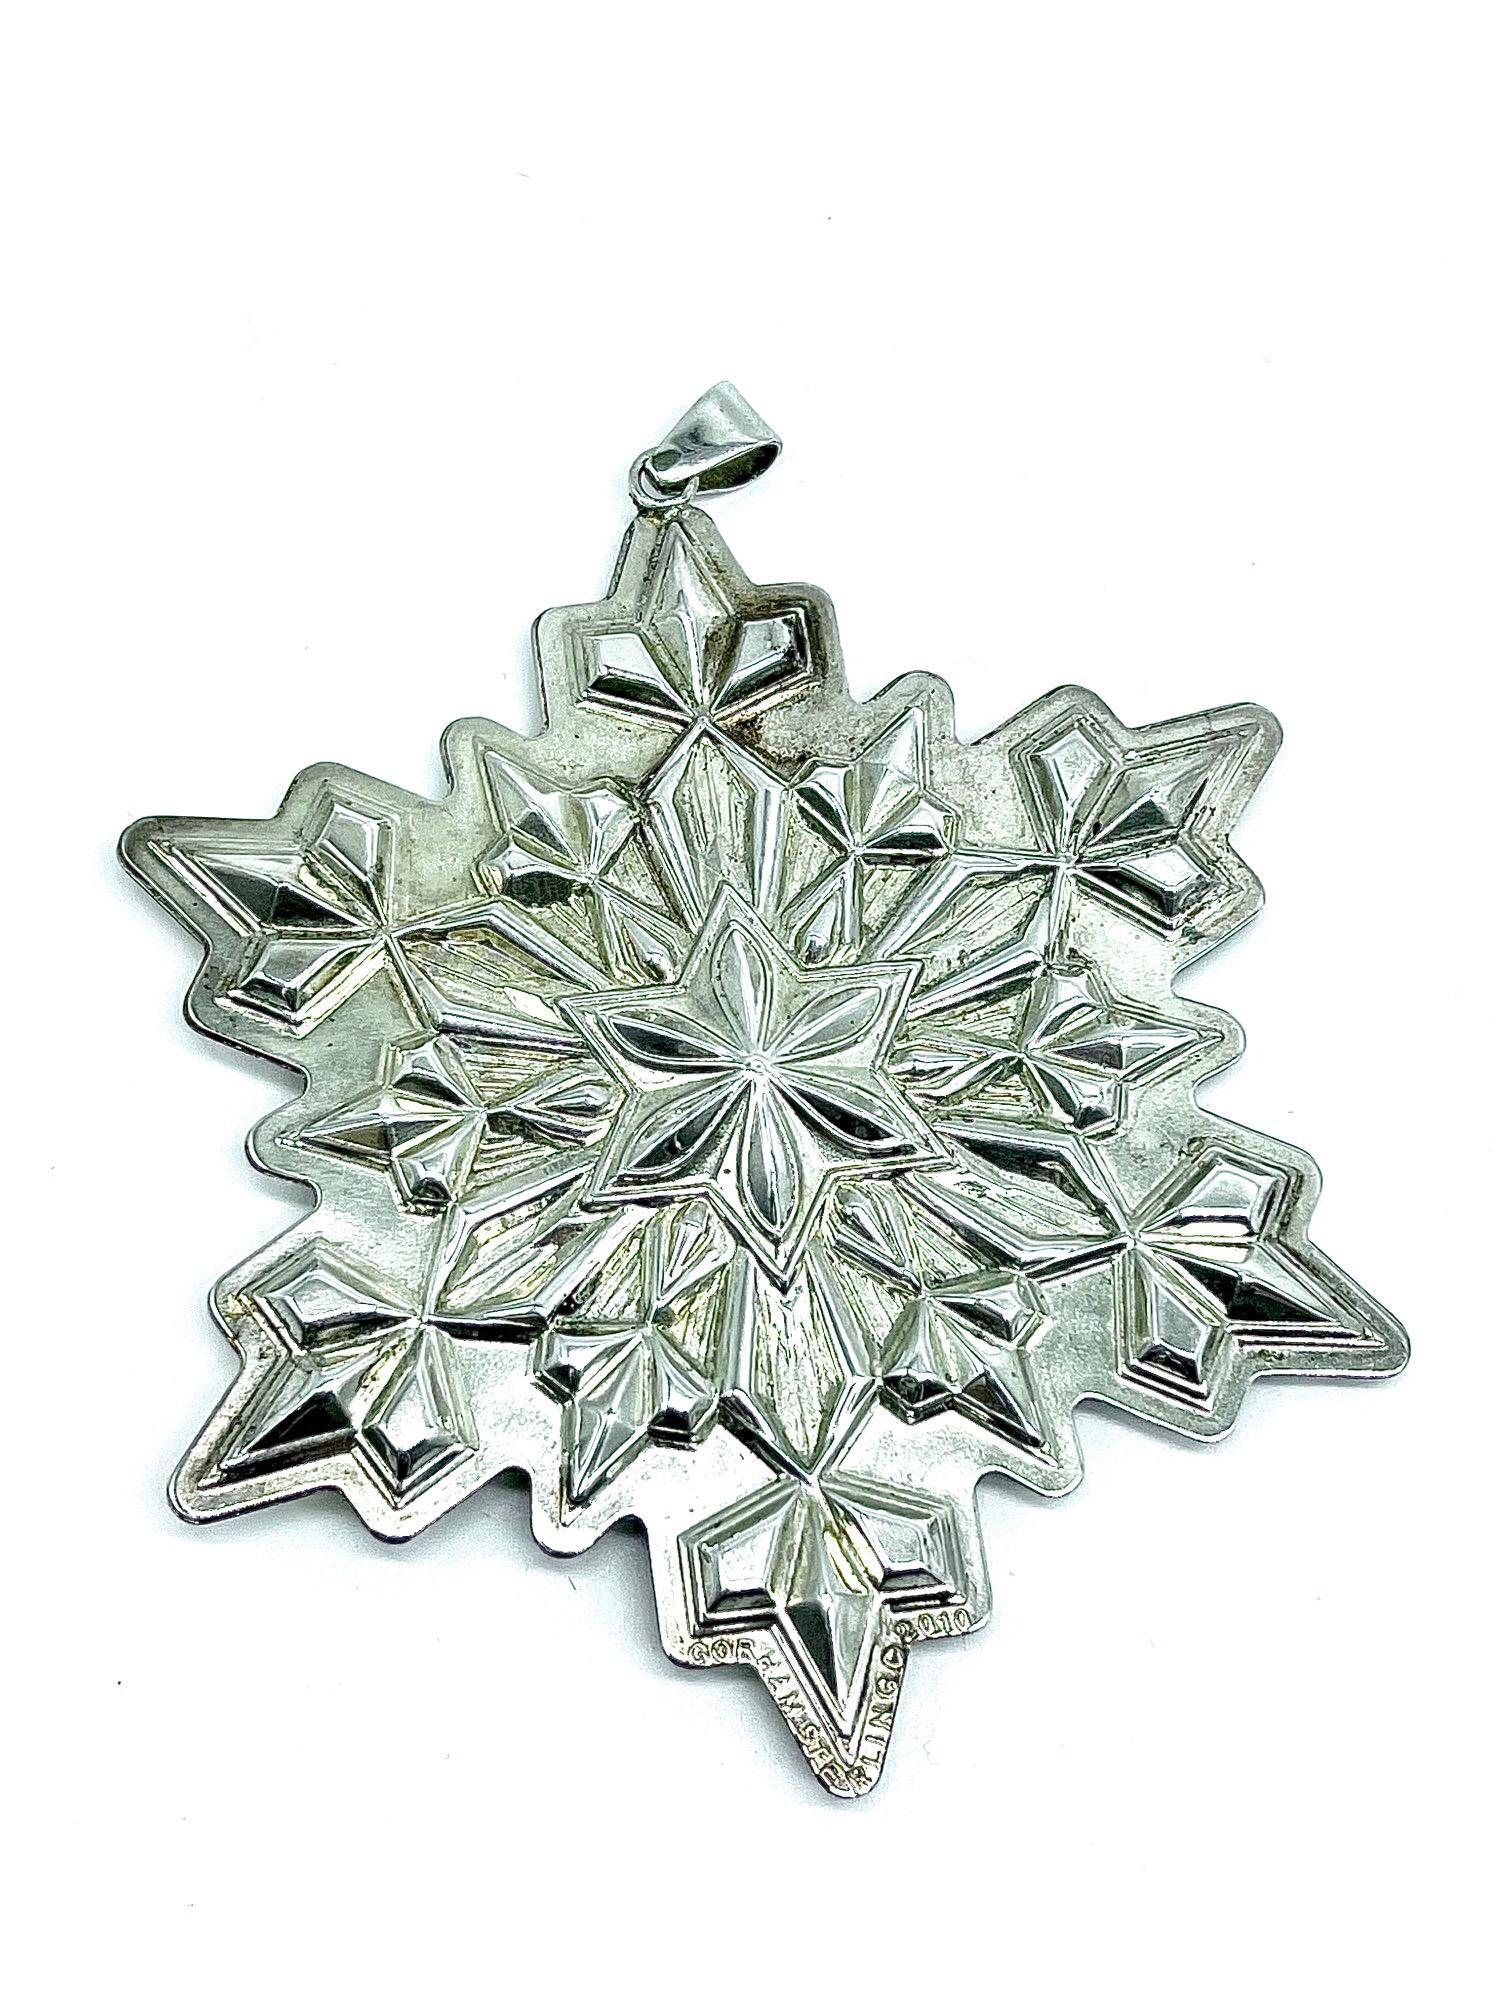 Set of 9 American Sterling Silver Christmas Snowflake Ornaments 1